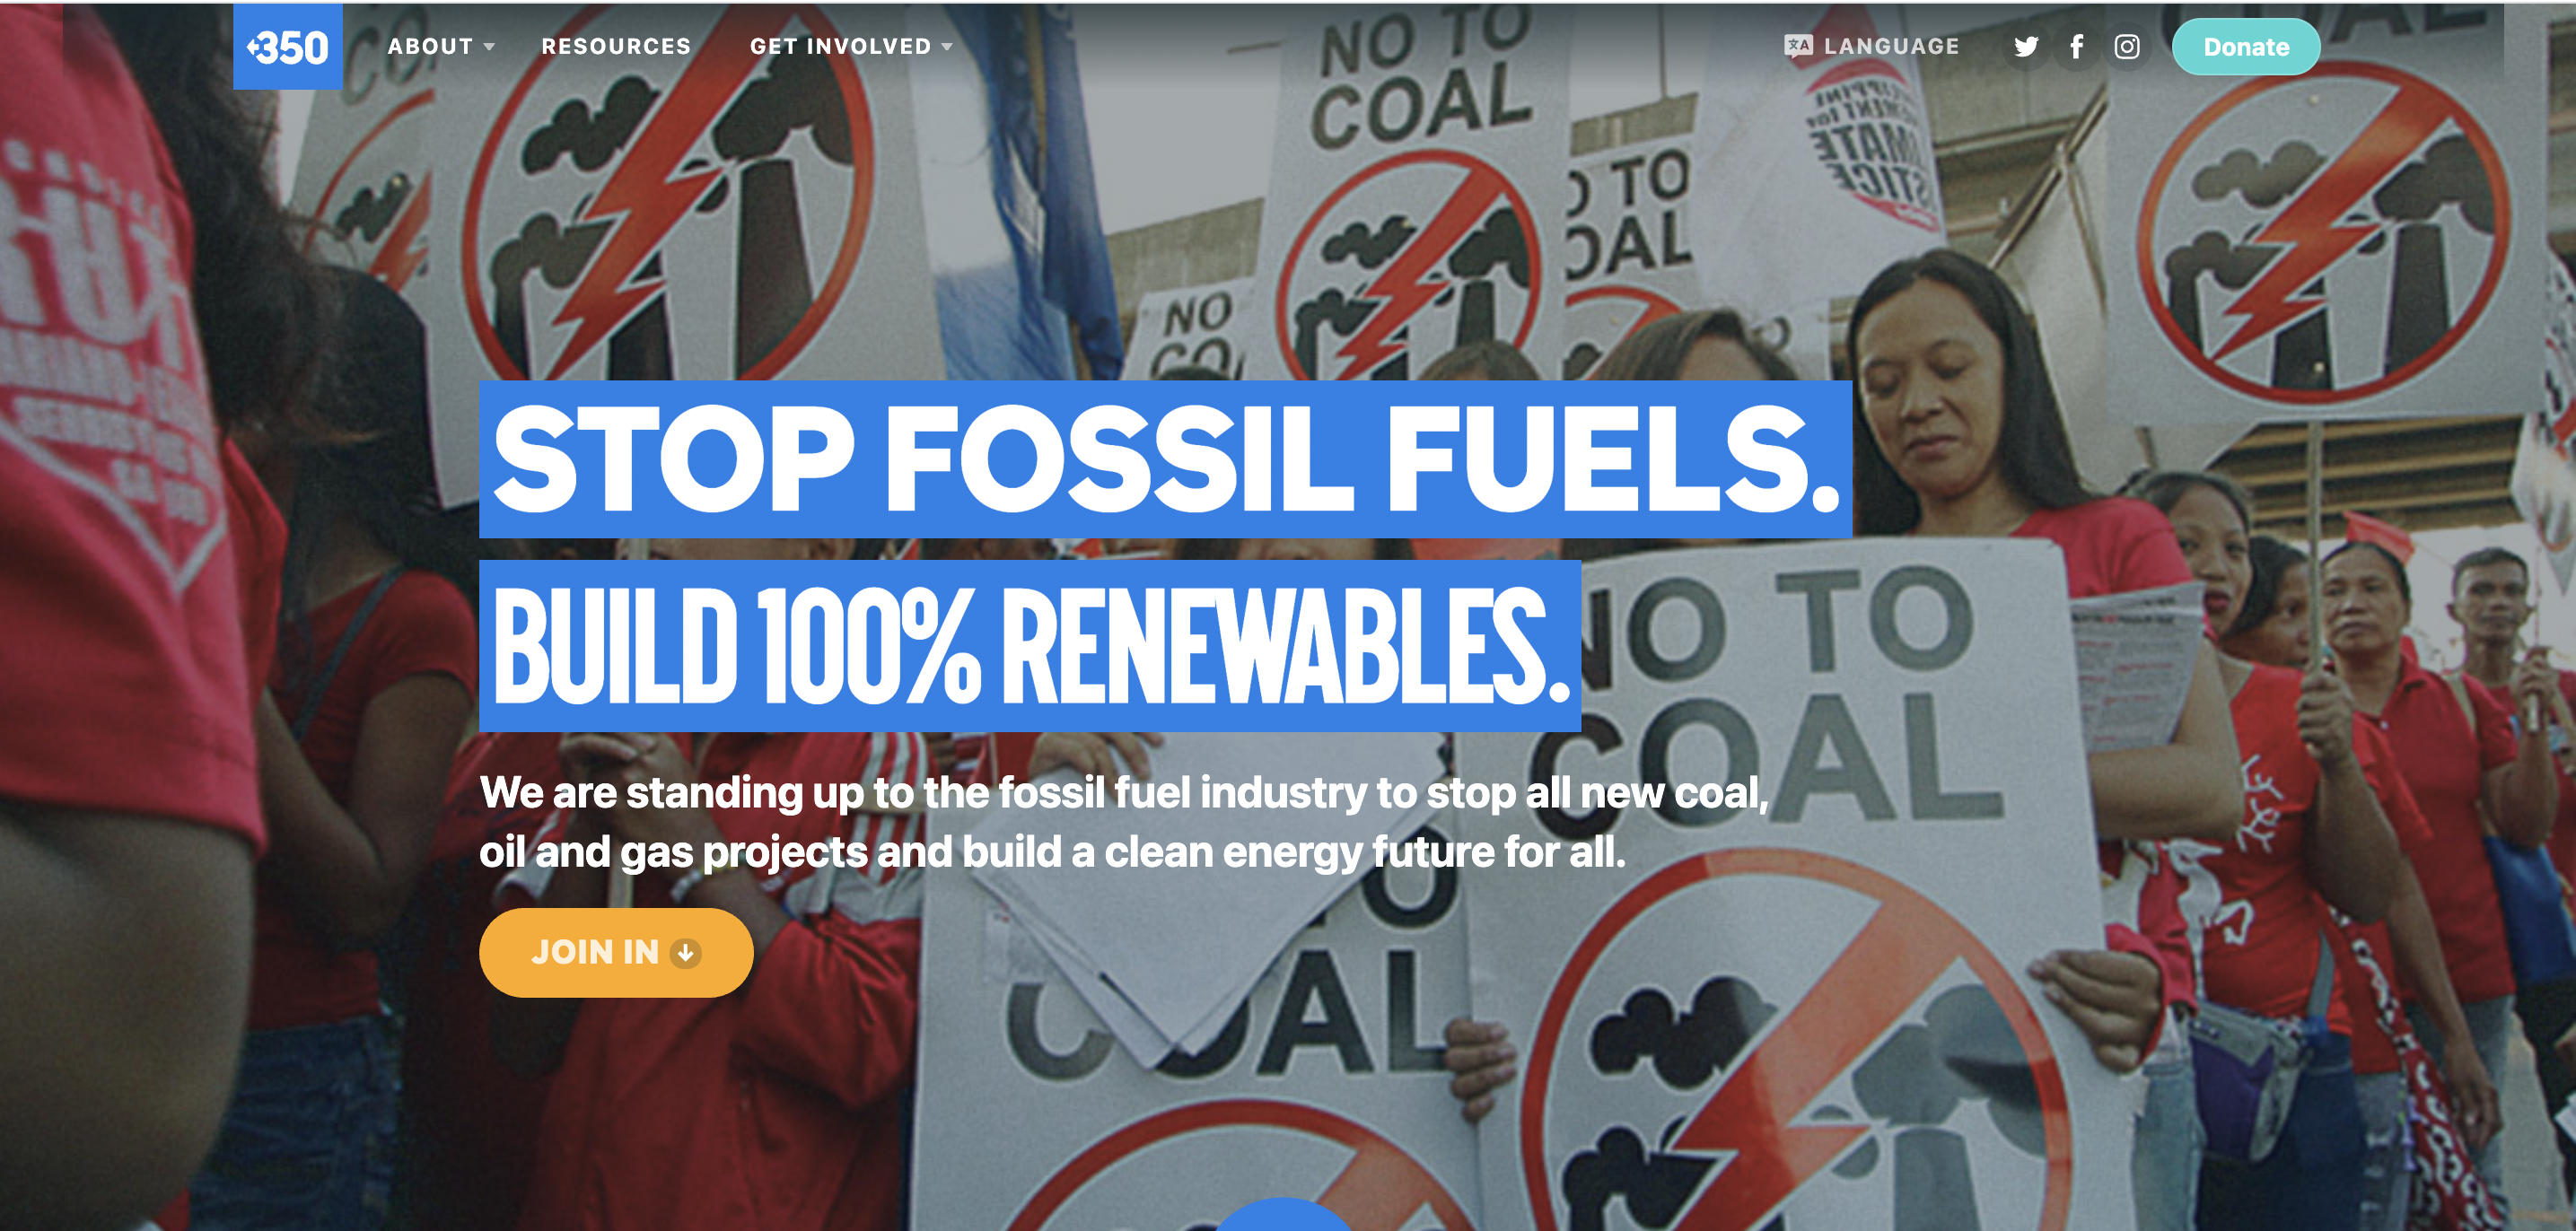 350 website screenshot showing full size image of fossil fuels protest with central headline and call to action button